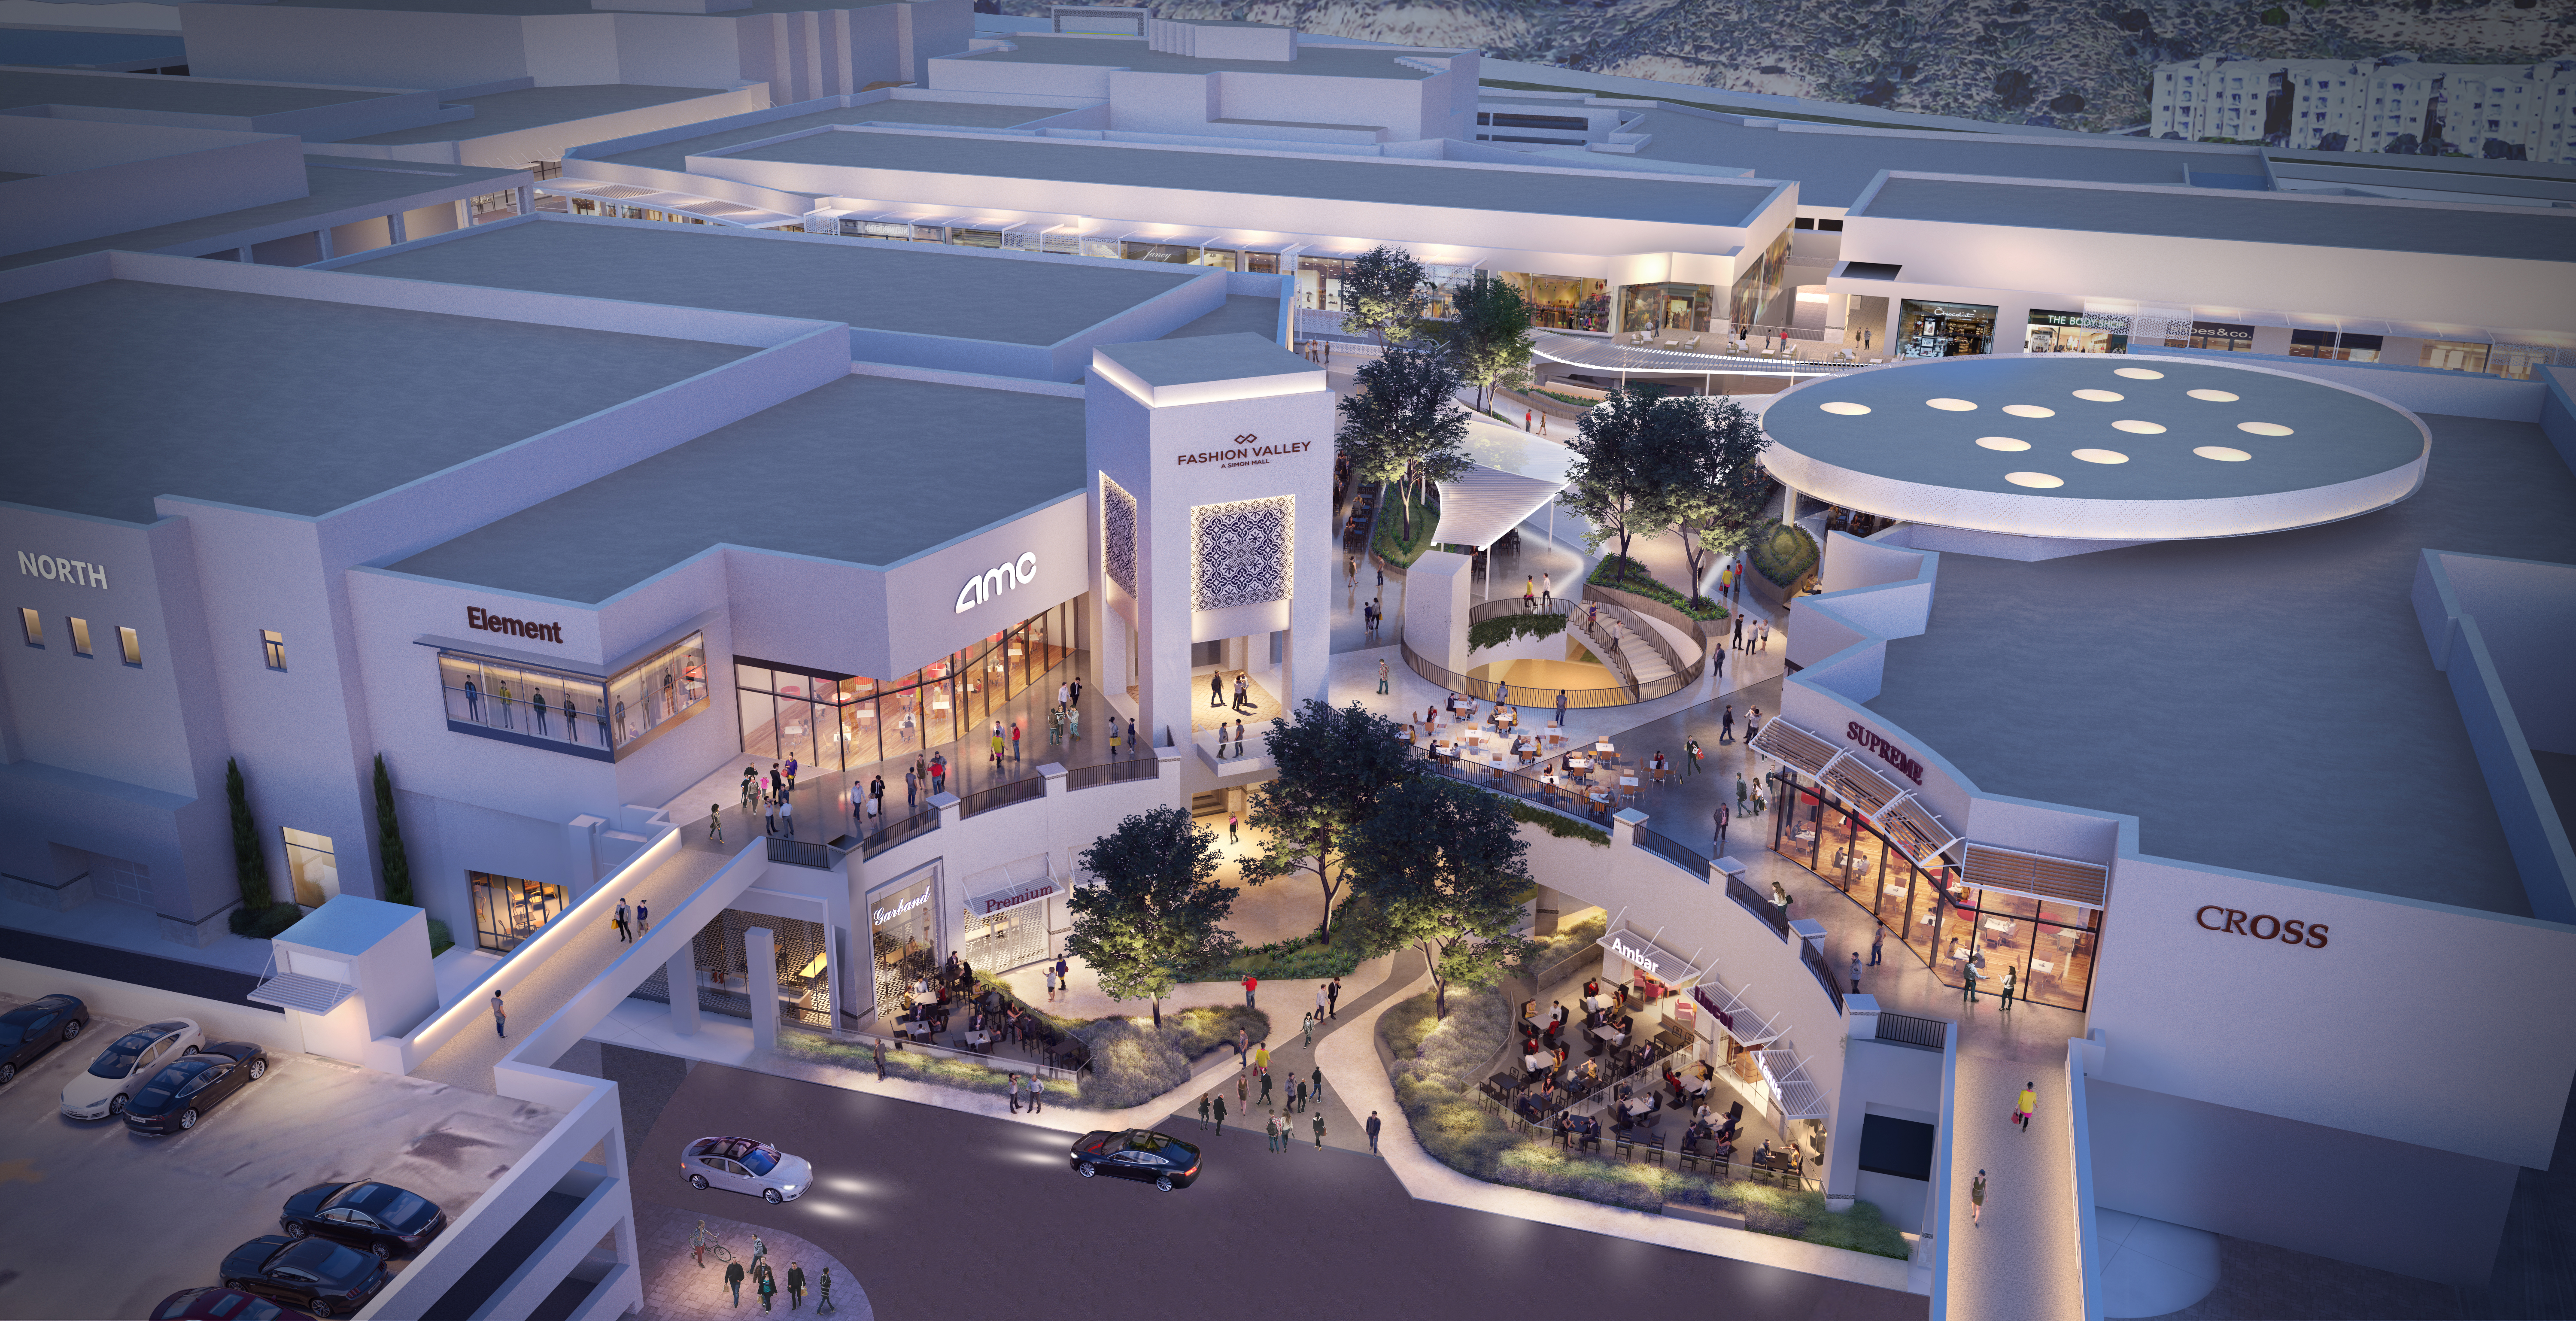 Rendering of Fashion Valley mall after makeover. (Courtesy of Simon)